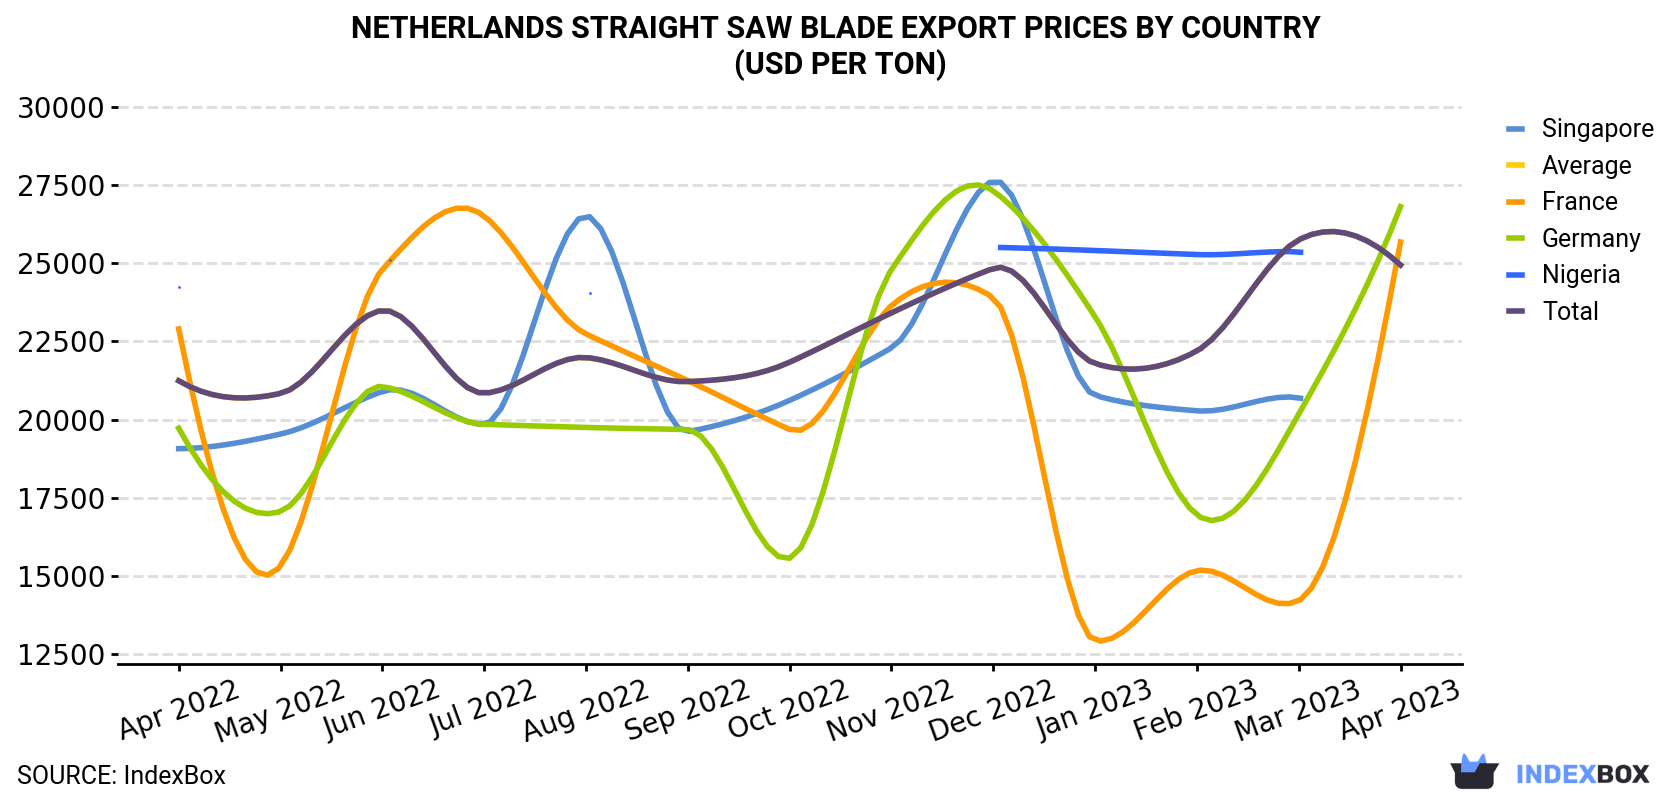 Netherlands Straight Saw Blade Export Prices By Country (USD Per Ton)